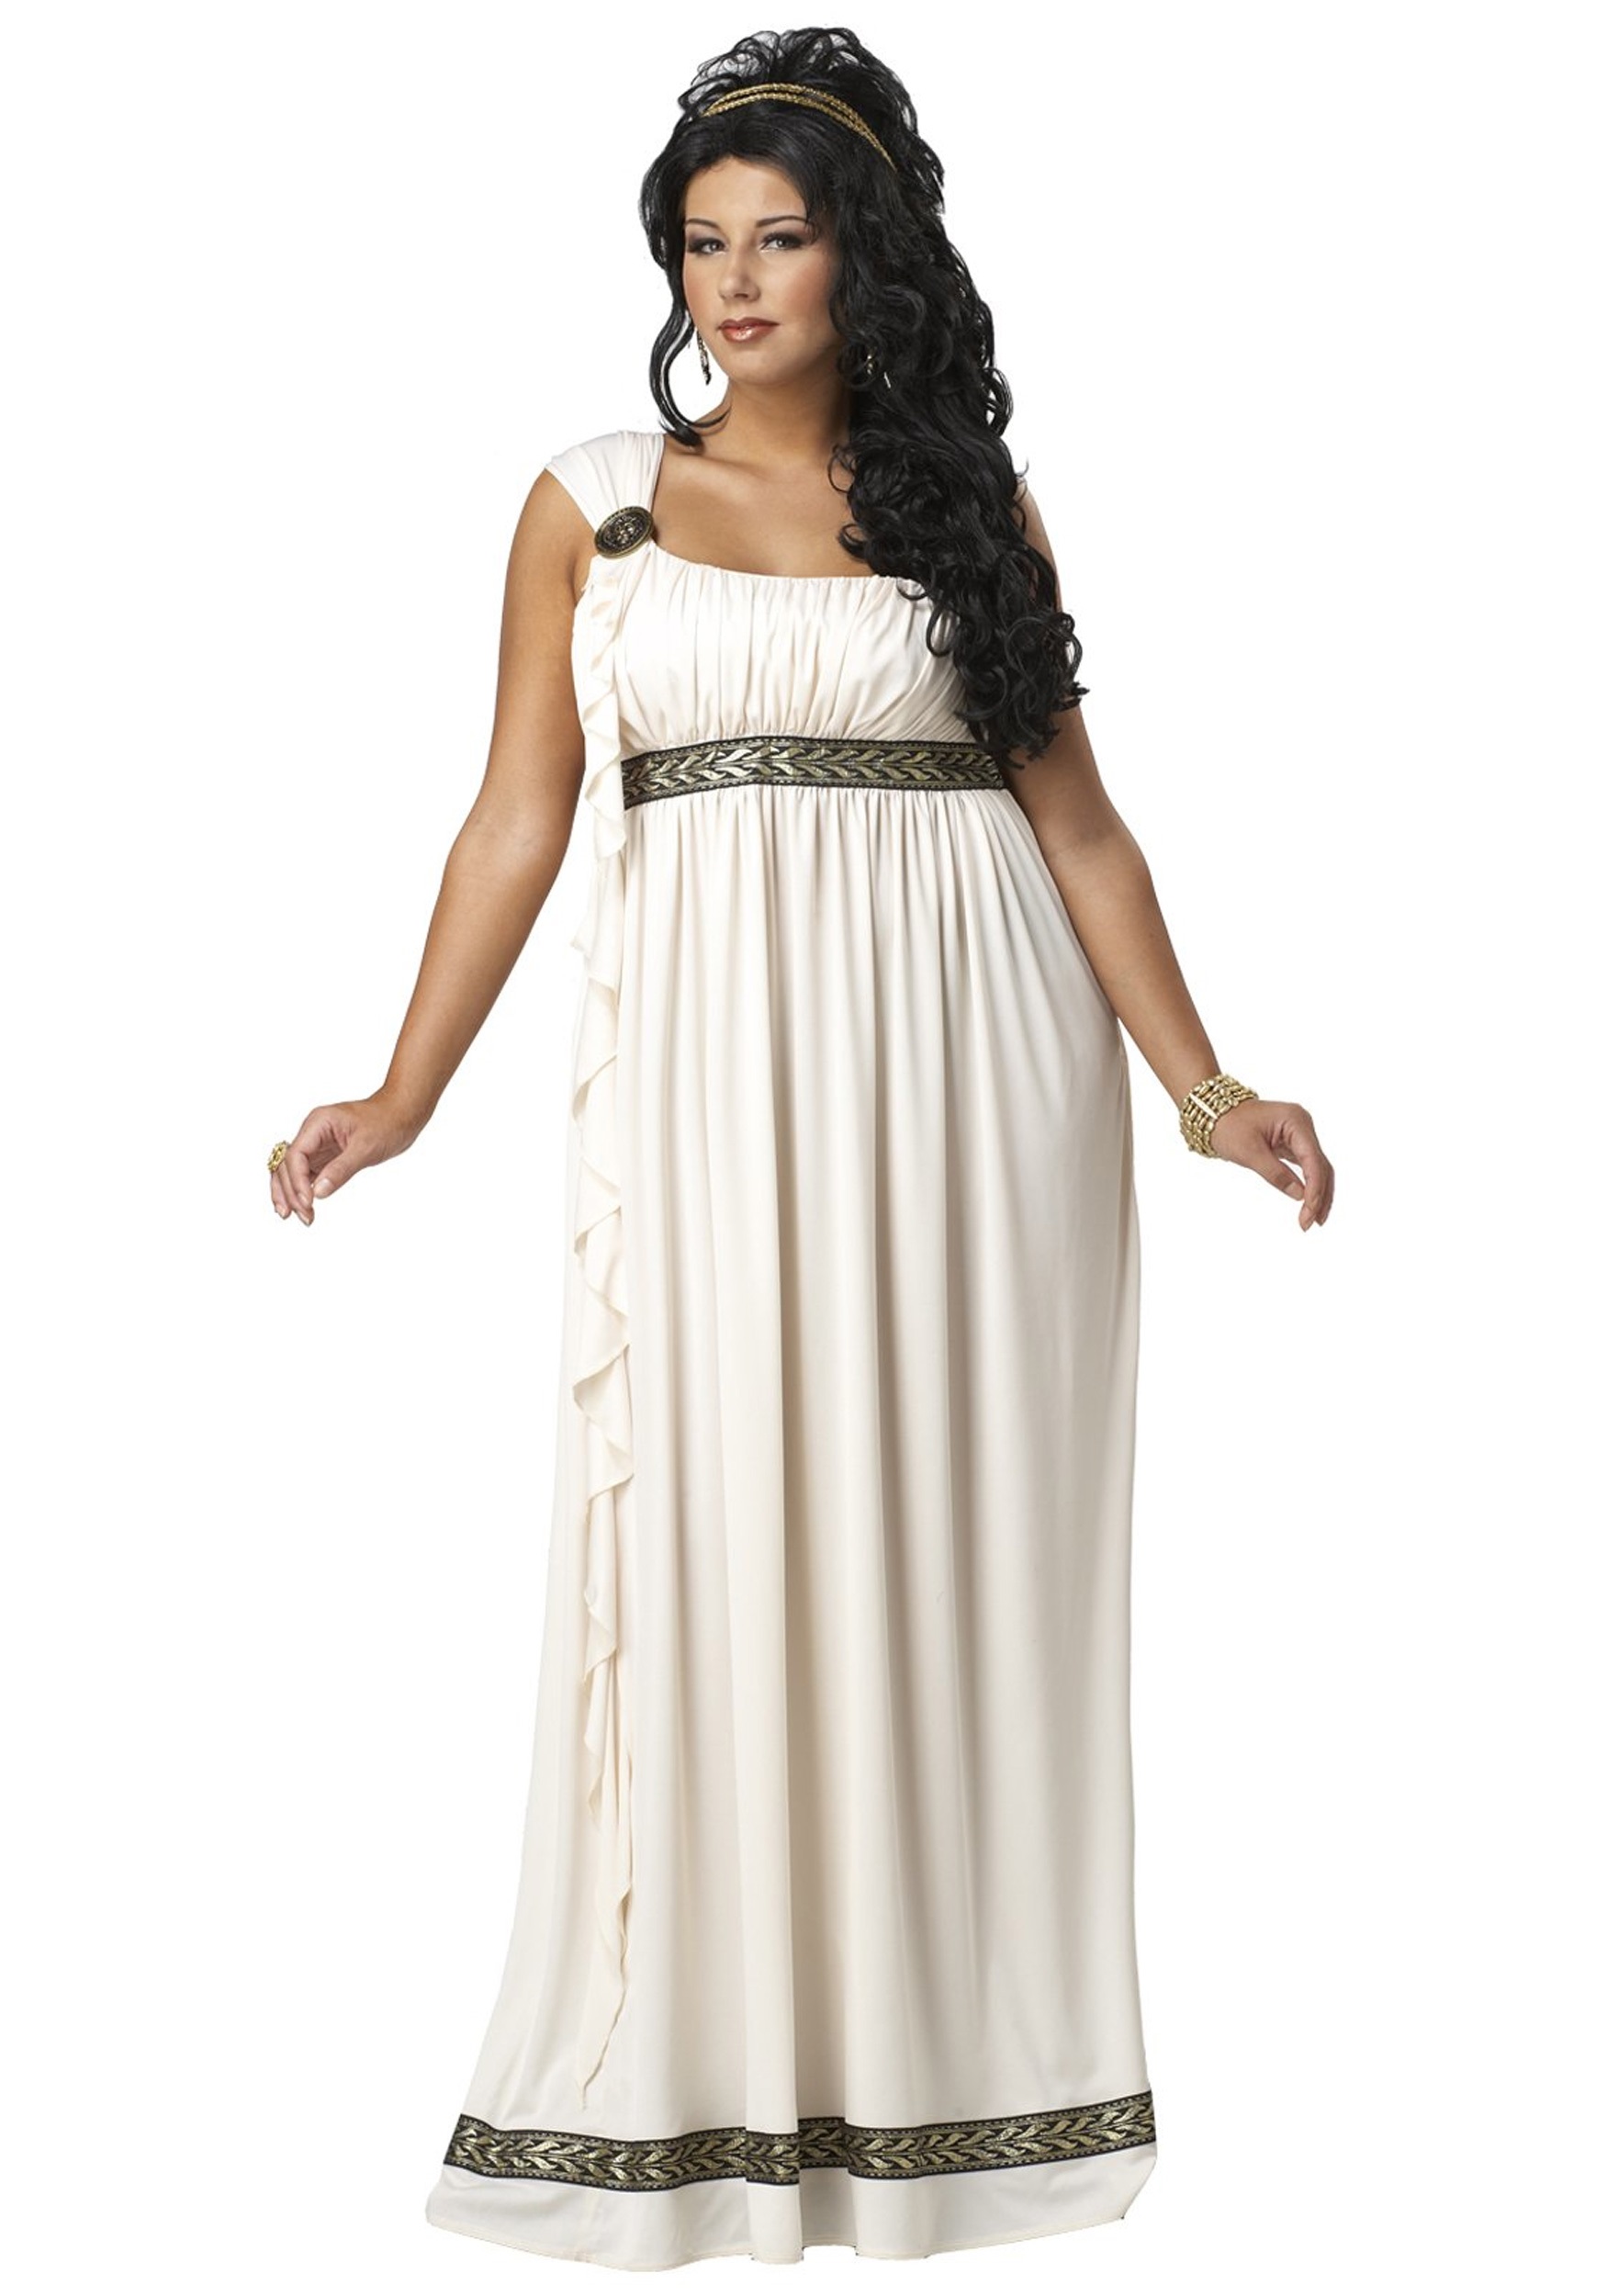 Photos - Fancy Dress California Costume Collection Olympic Goddess Plus Size Women's Costume Br 